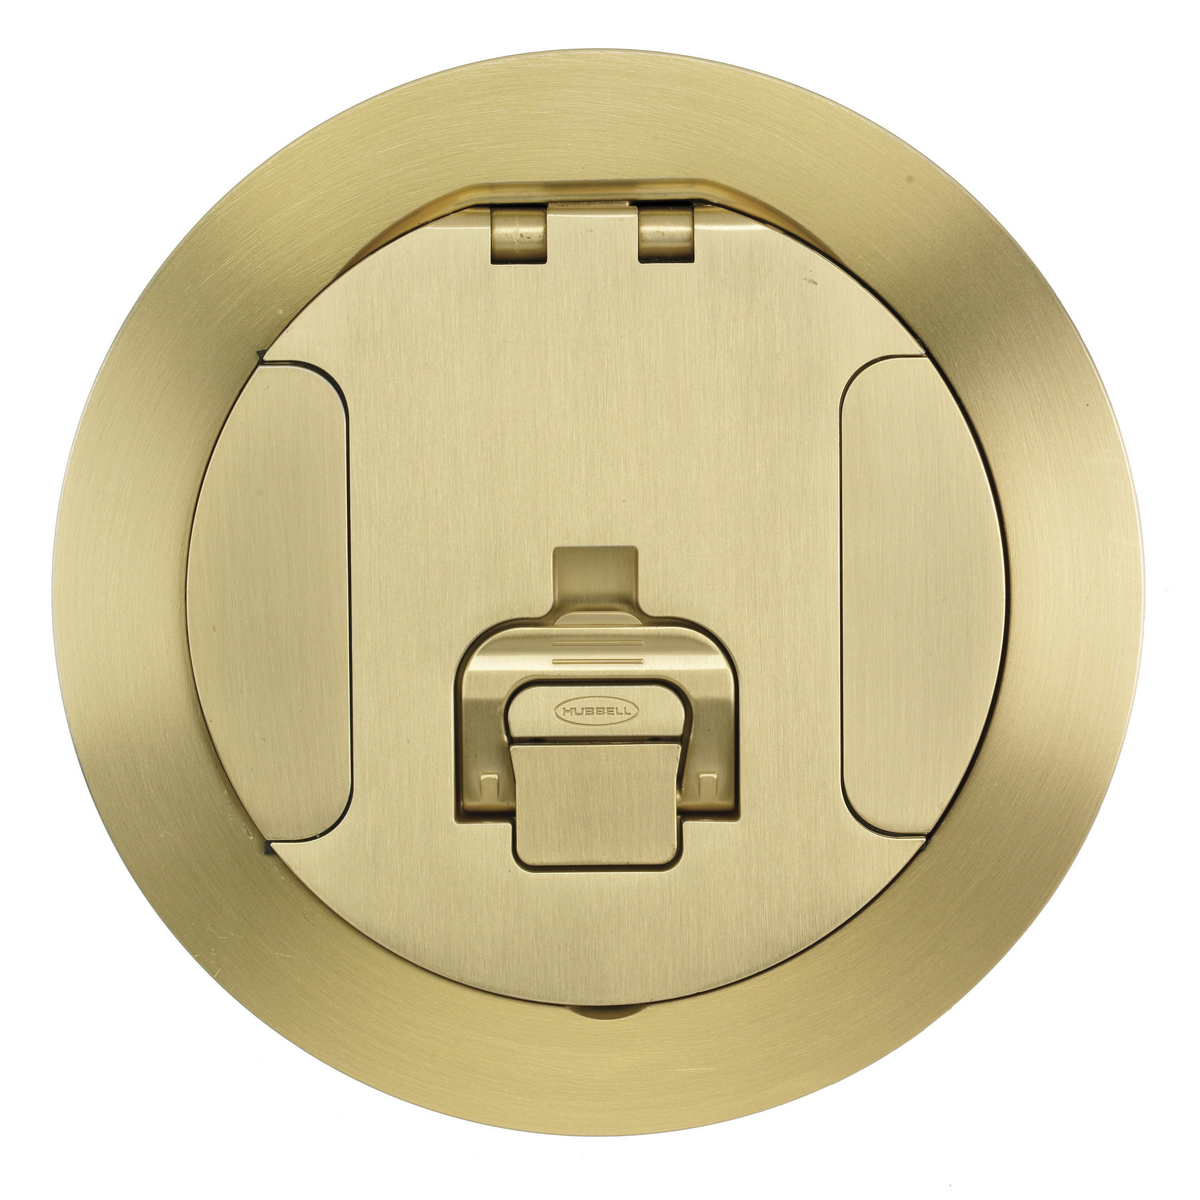 CFB ROUND 6 INCH COVER, BRASS